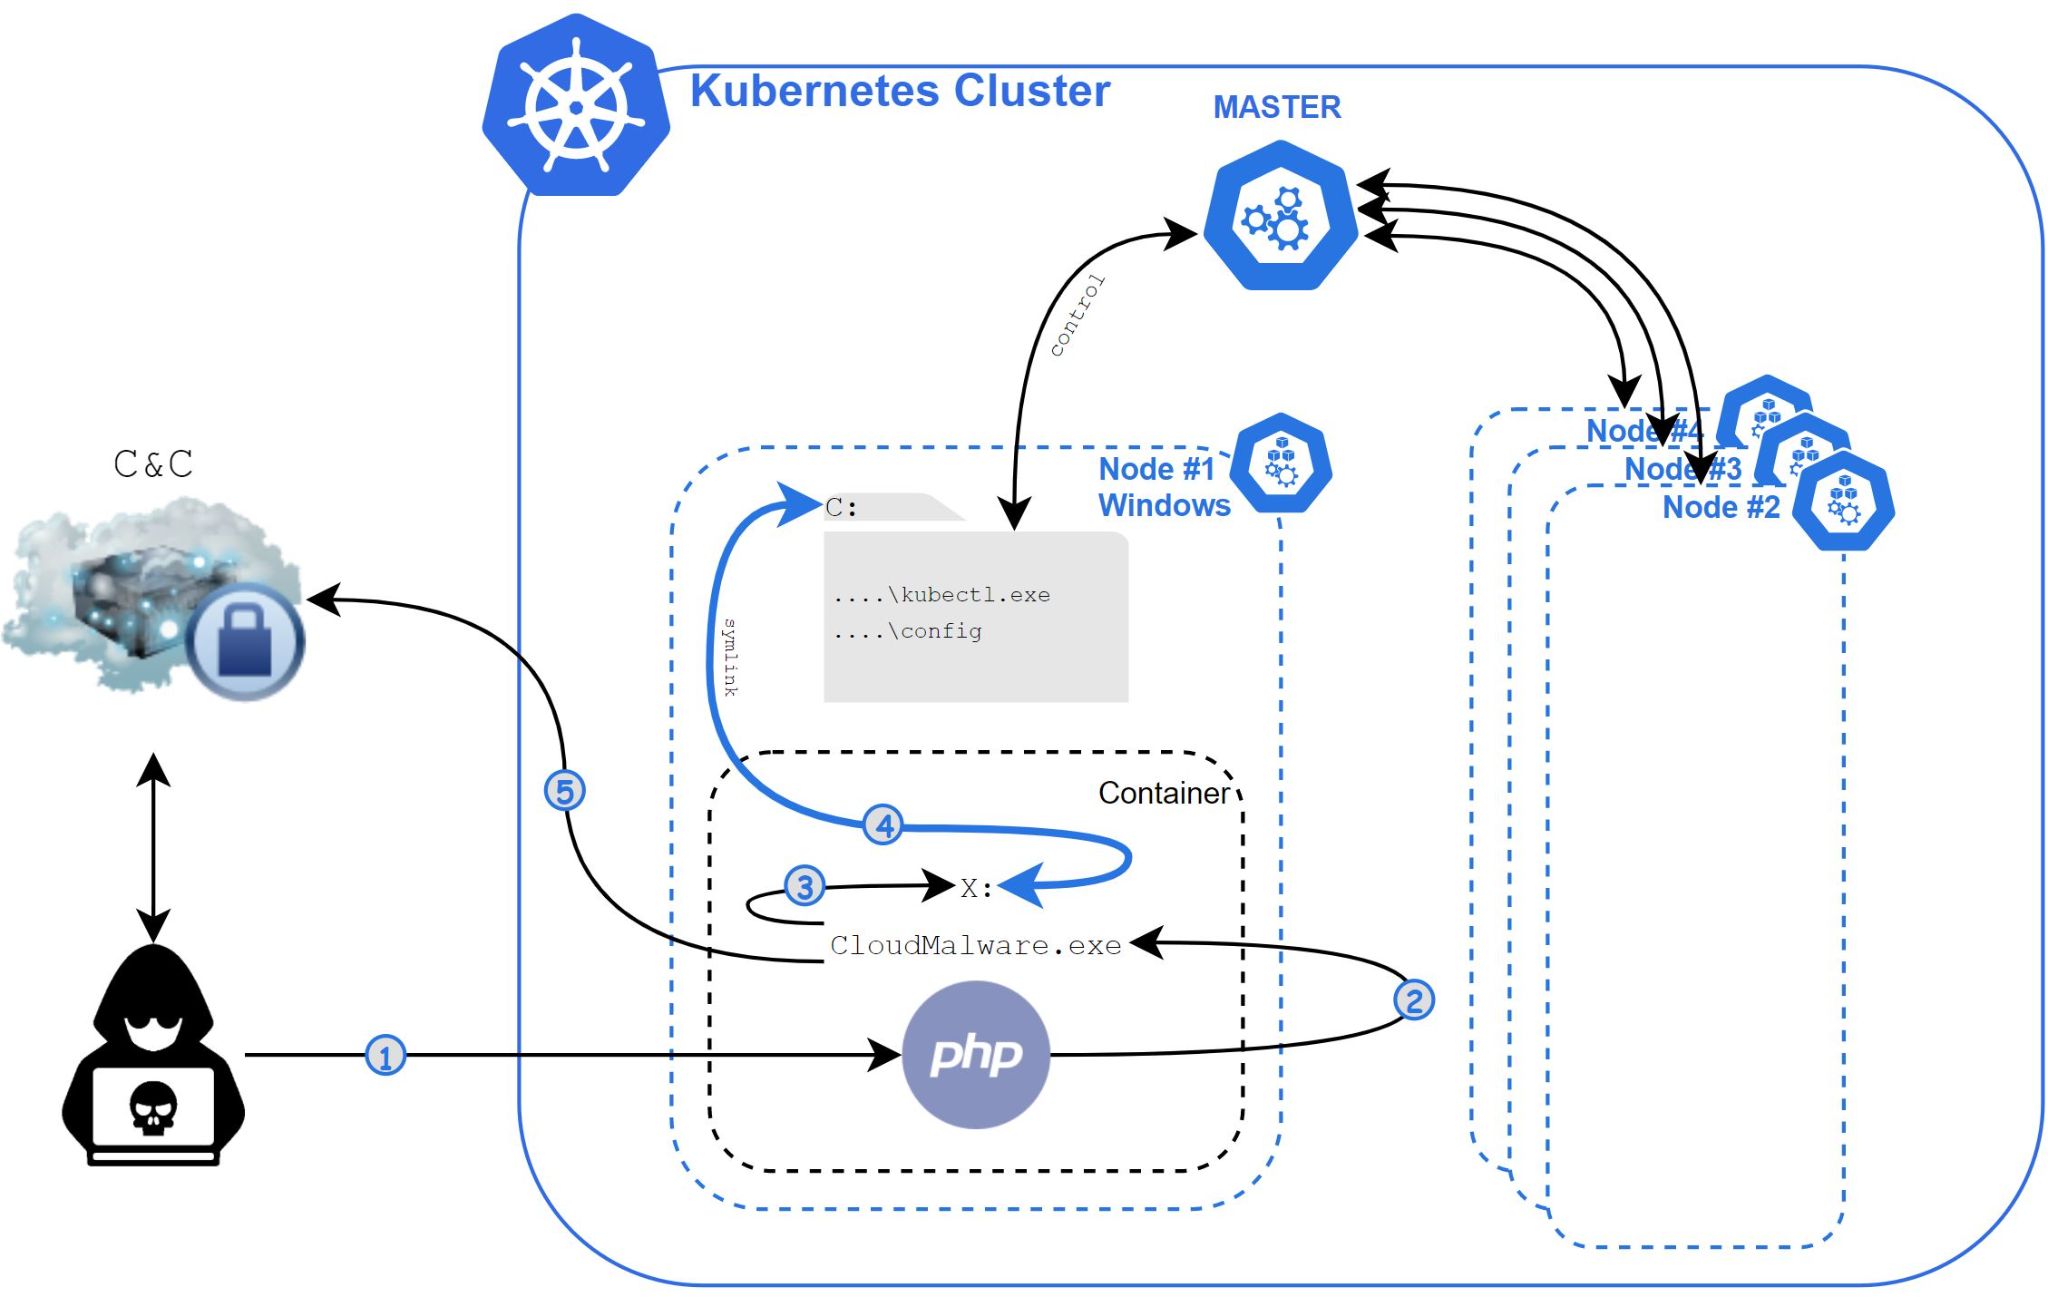 The diagram shows the overall execution flow of Siloscape, including its communications with its C2 server and its movement through a poorly configured Kubernetes cluster. 